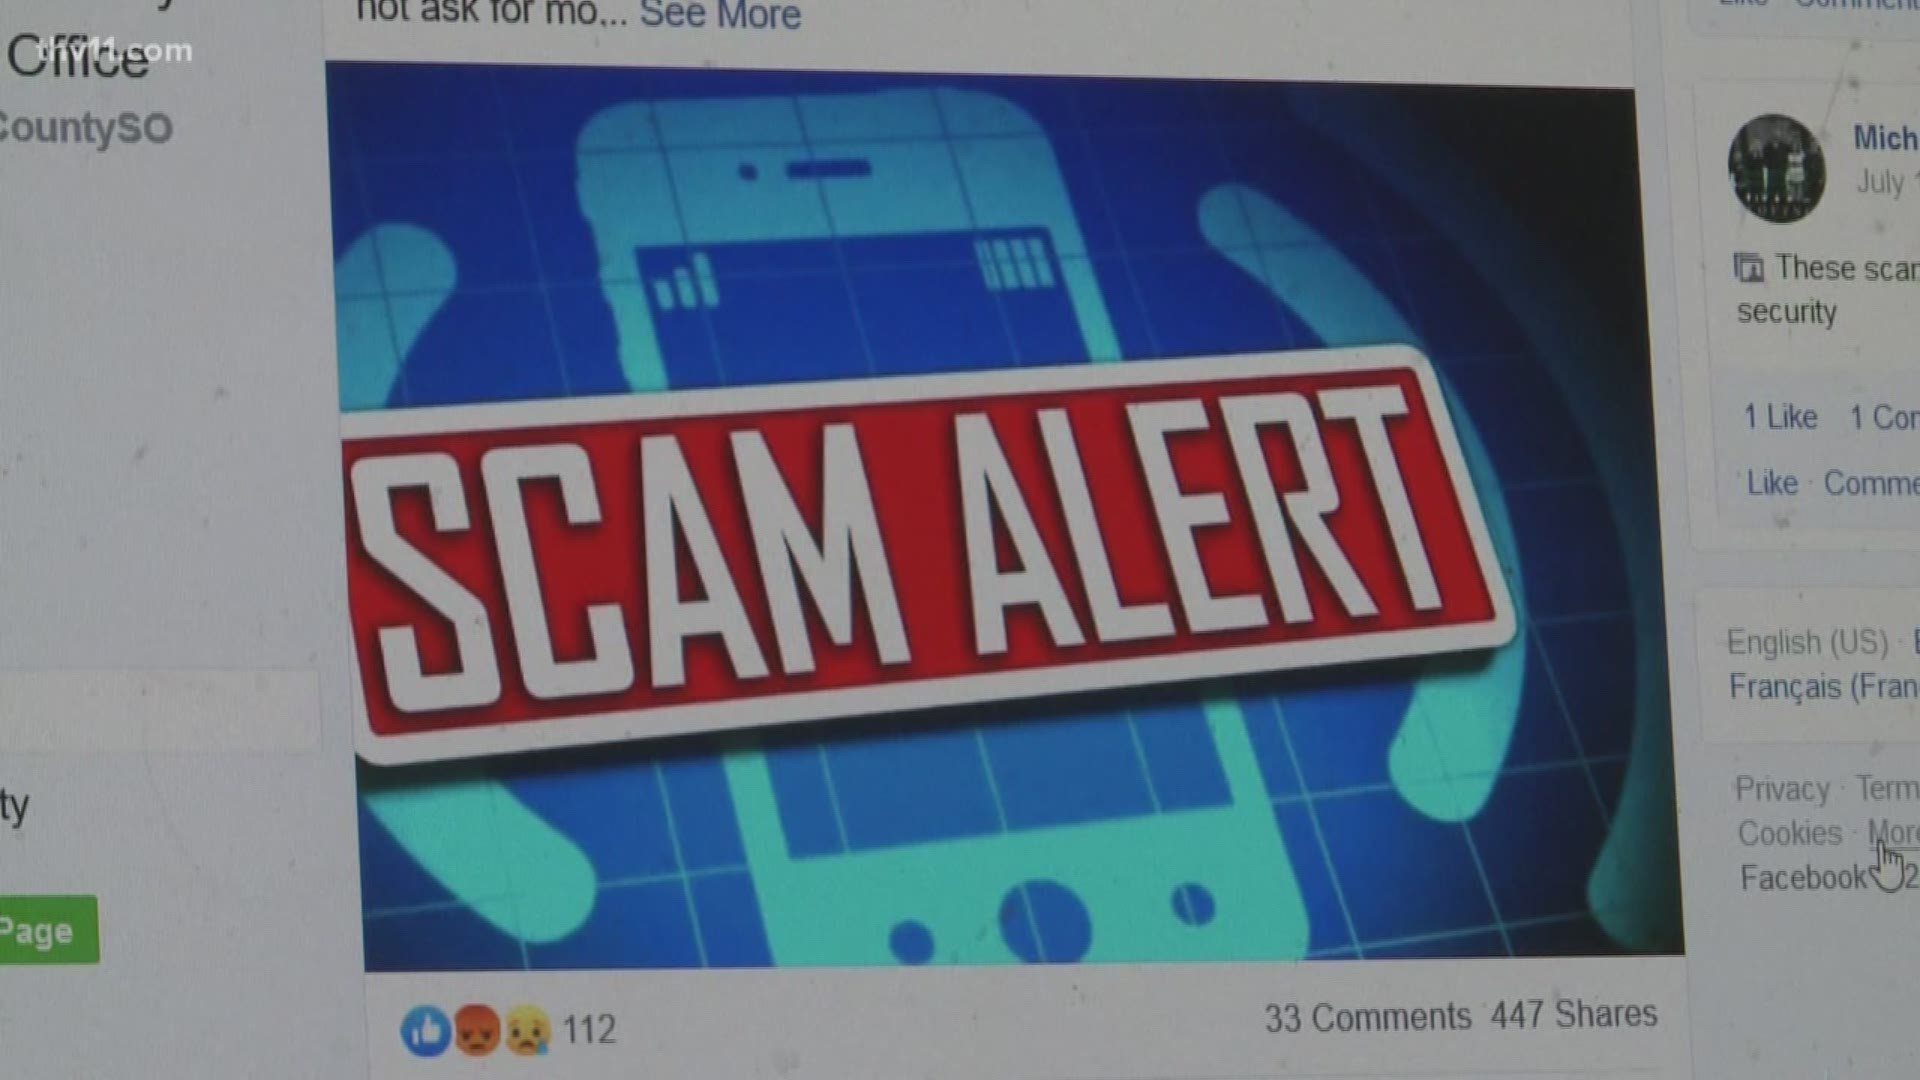 Most of us have had at least a brush with someone completely dishonest, but what's so bothersome is the Pulaski County Sheriff's Office is telling us callers are pretending to be a deputy from the department. They are warning us all to be aware.